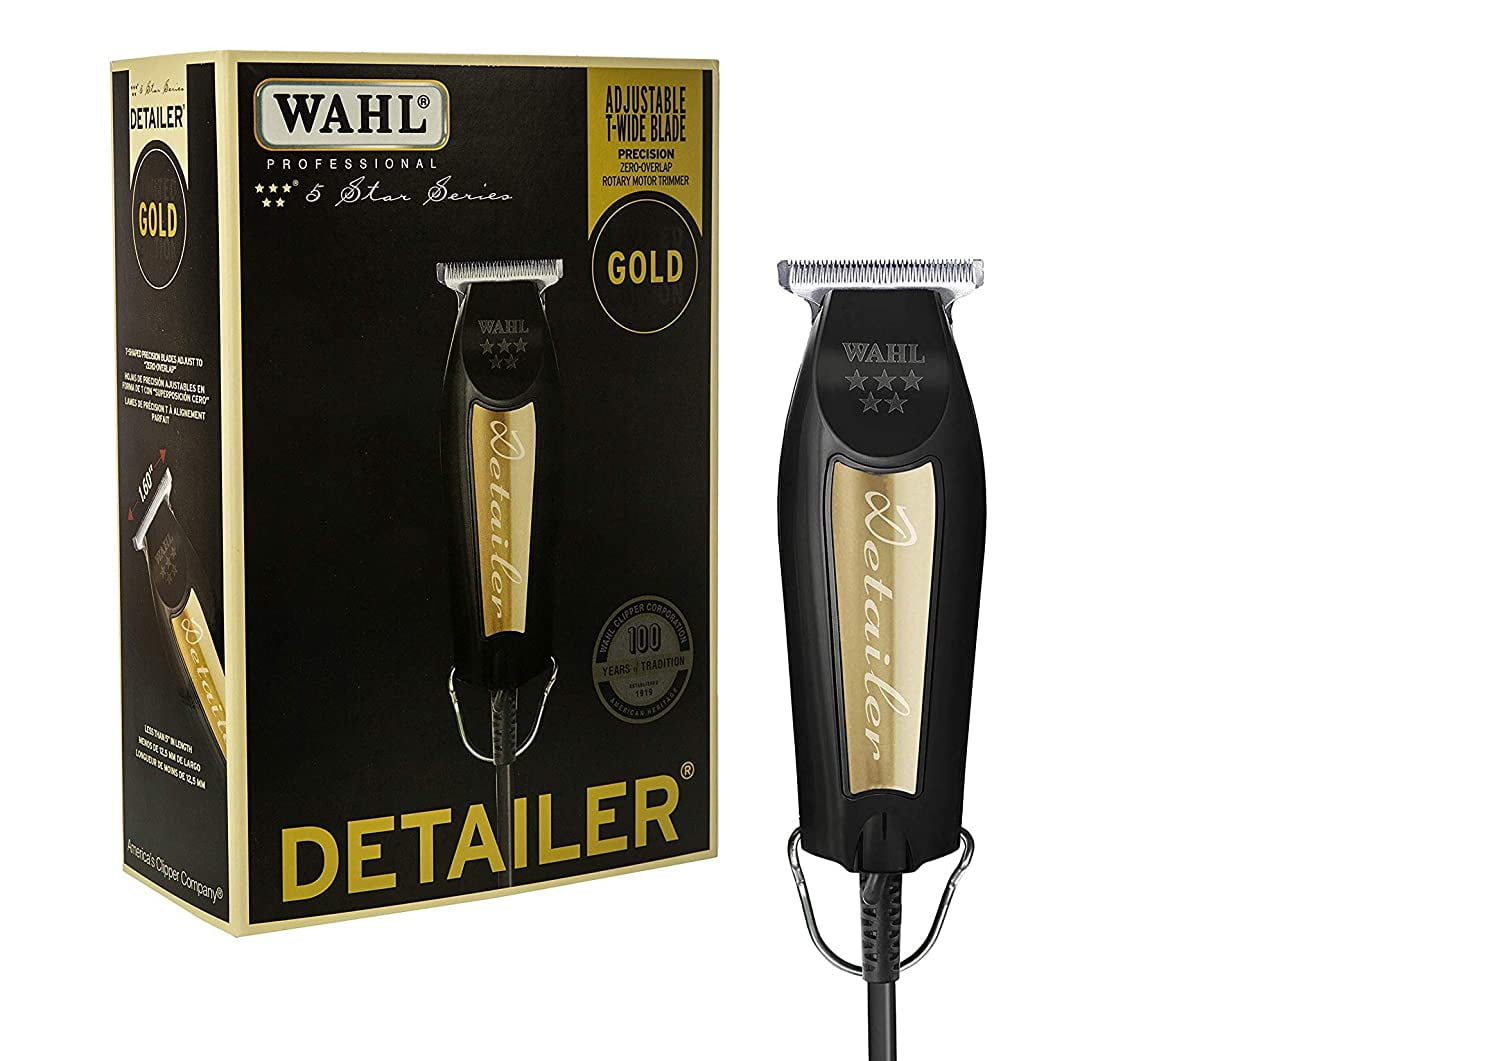 Wahl Professional 5-Star Series Limited Edition Black & Gold Corded Detailer  #8081-1100 - Great for Professional Stylists and Barbers 